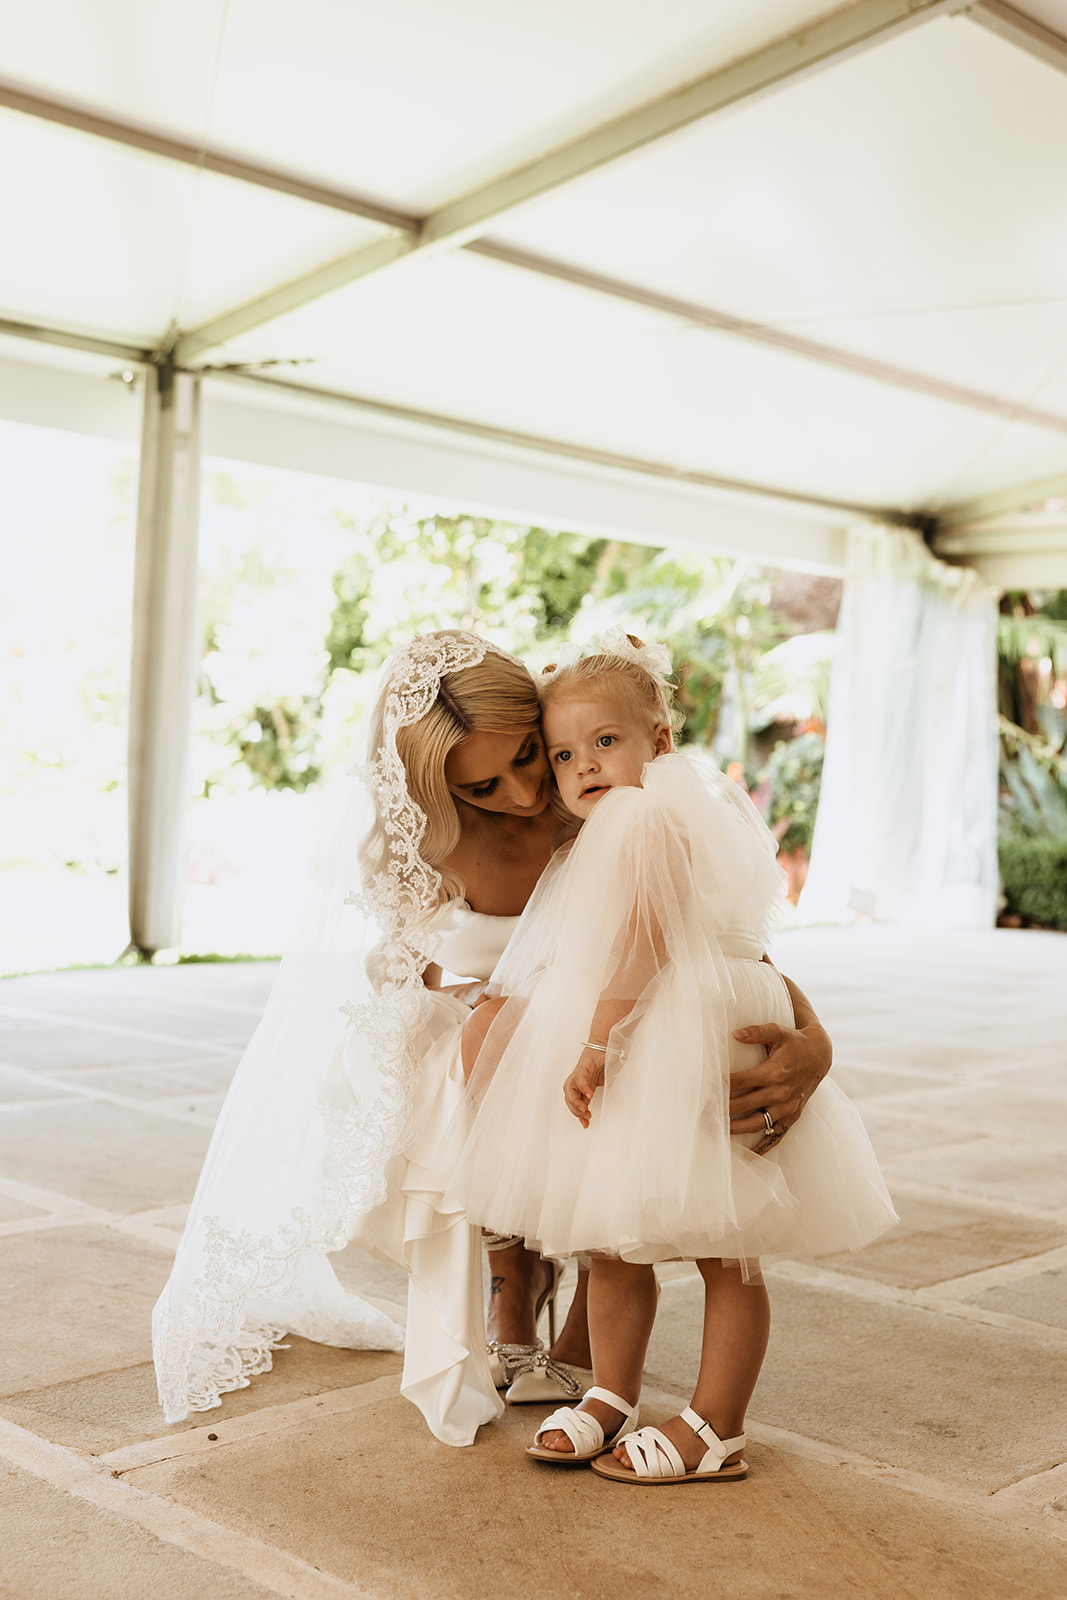 Bride with her daughter at the Wedding in Lindesay House, Darling Point New South Wales